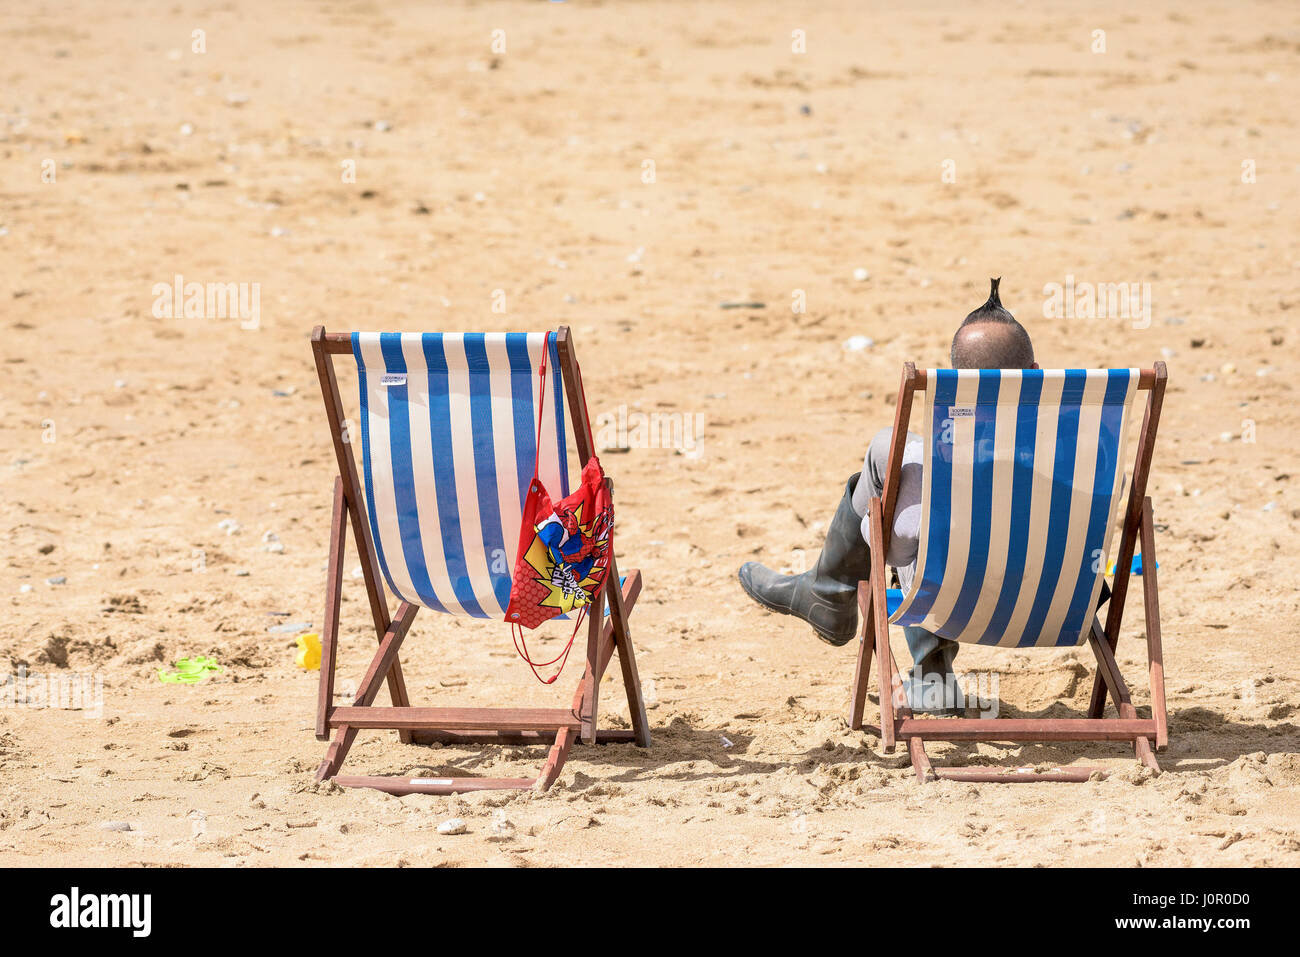 Fistral Beach Newquay Deckchairs Man Mohican Hairstyle Relaxing Relaxation  Sitting Seaside Tourism Beach Holiday Vacation Leisure Cornwall Stock Photo  - Alamy